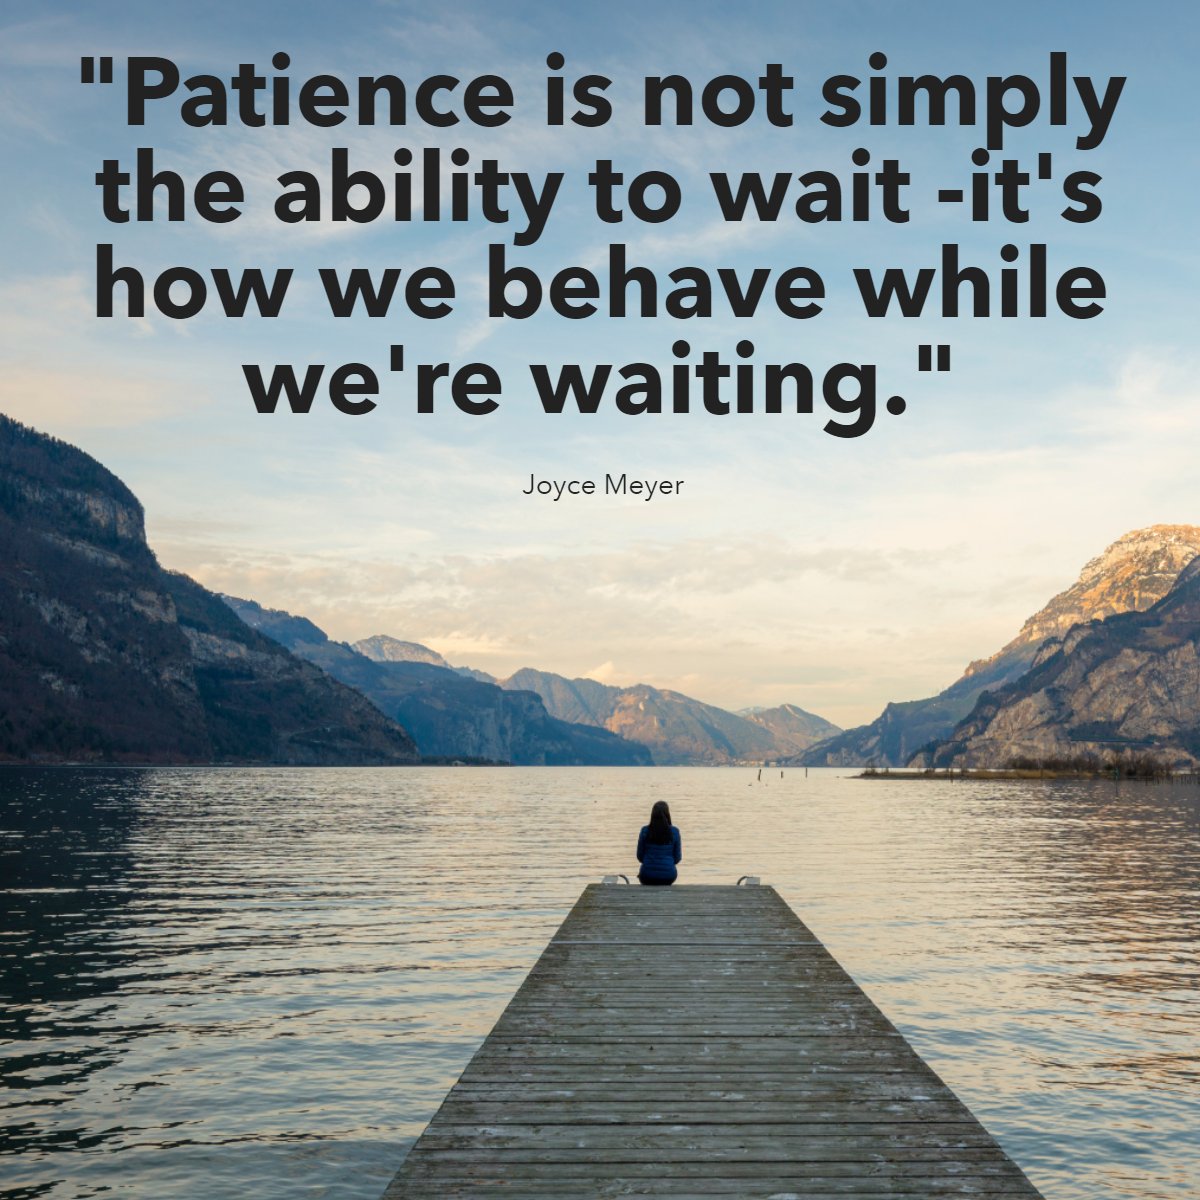 'Patience is not simply the ability to wait - it's how we behave while we're waiting.'
– Joyce Meyer

 #instaquote    #wisdom    #quoteoftheday 
#RacingRealEstateAgent #BarrettRealEstate #StoneTreeRealEstateTeam #maricopaazrealestate #racingagent #arizonarealestate